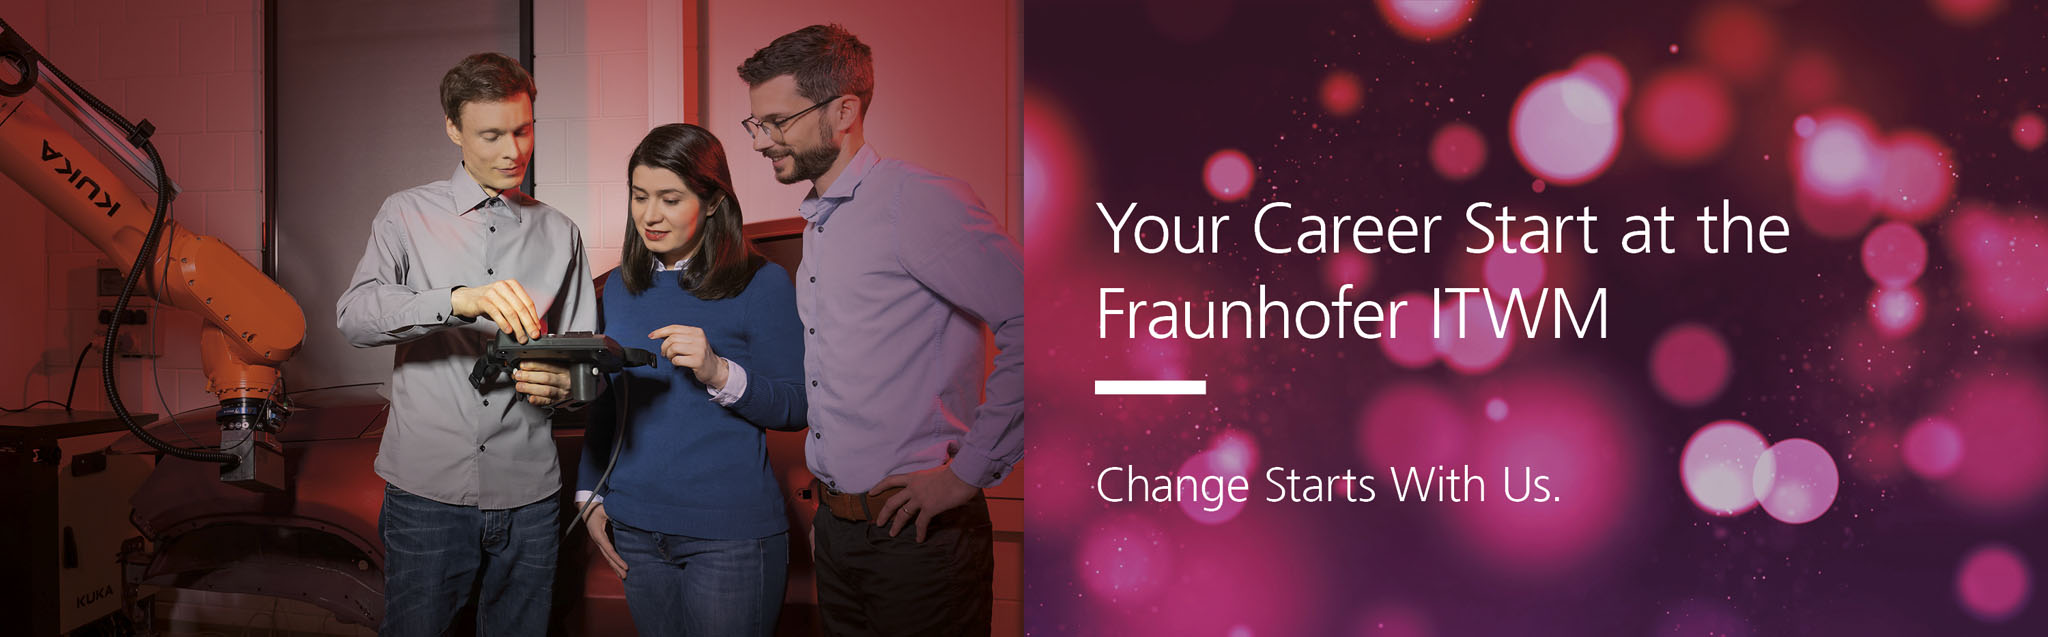 Your Career Start at the Fraunhofer ITWM